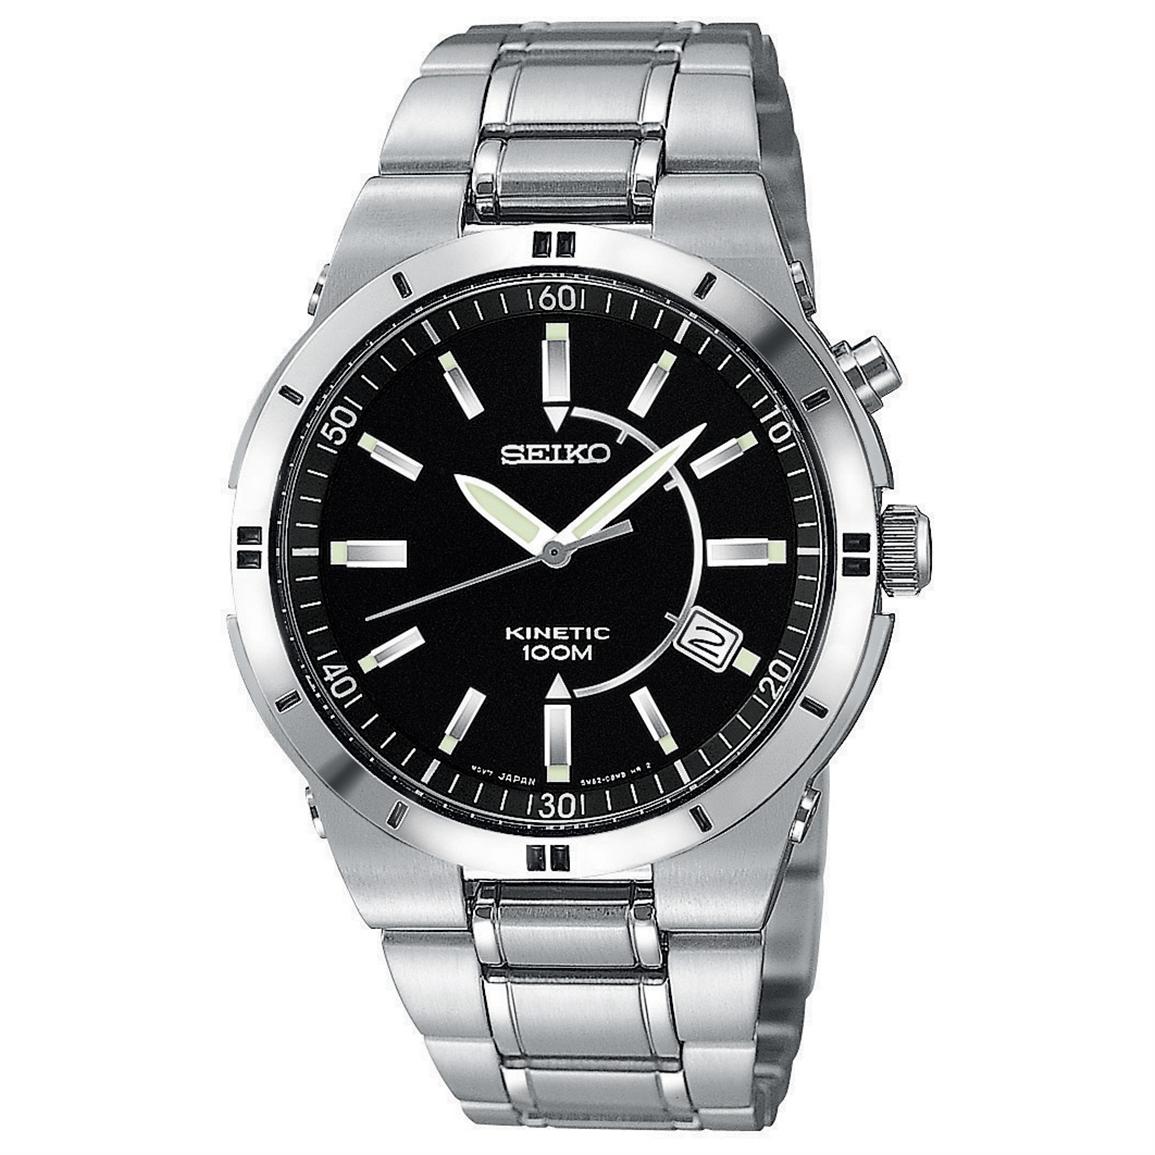 Men's Seiko® SKA347 Kinetic Watch - 213073, Watches at Sportsman's Guide